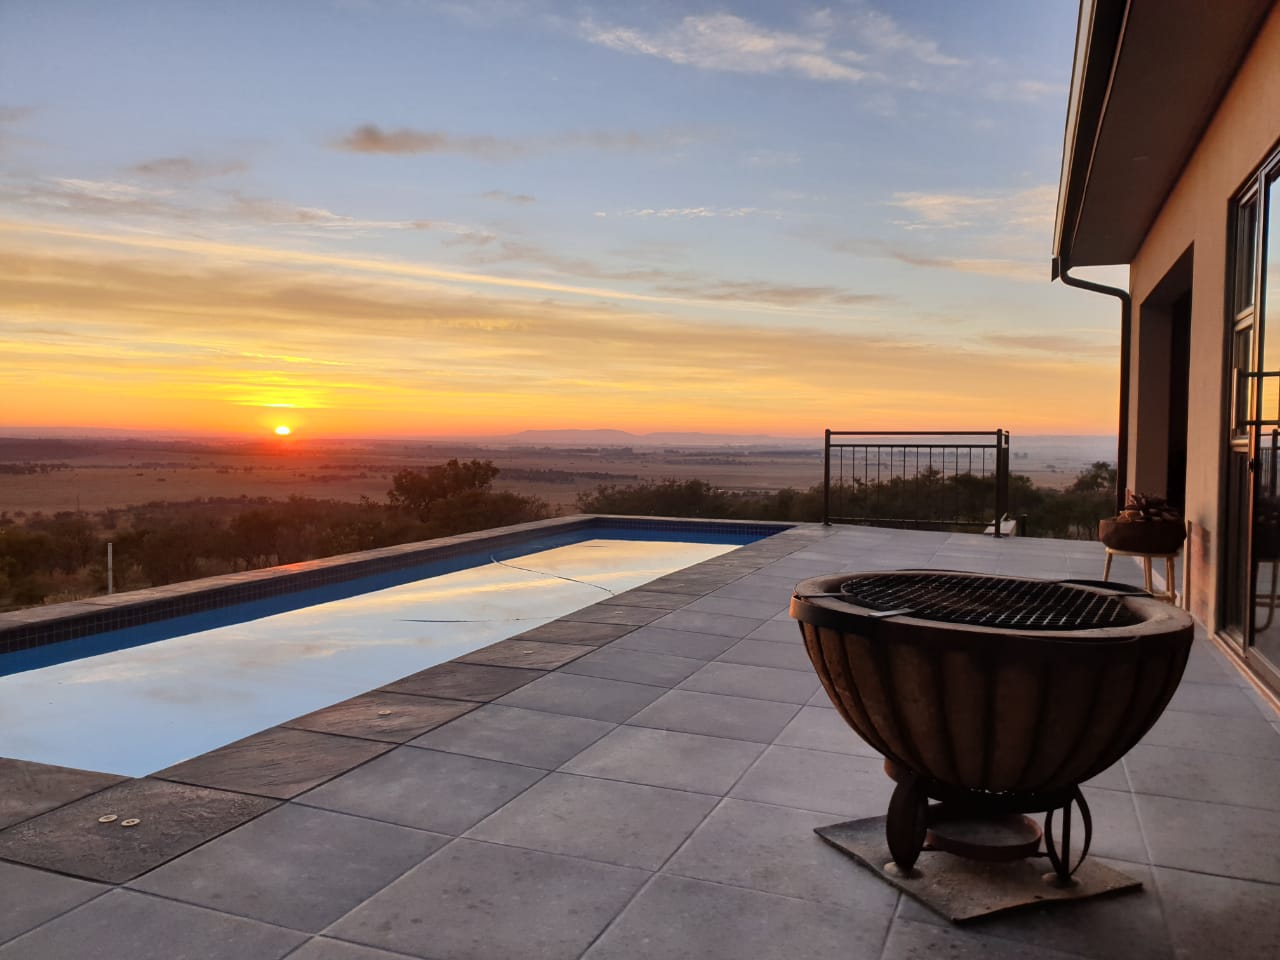 Lekwena Wildlife Estate view from home with pool and sunset